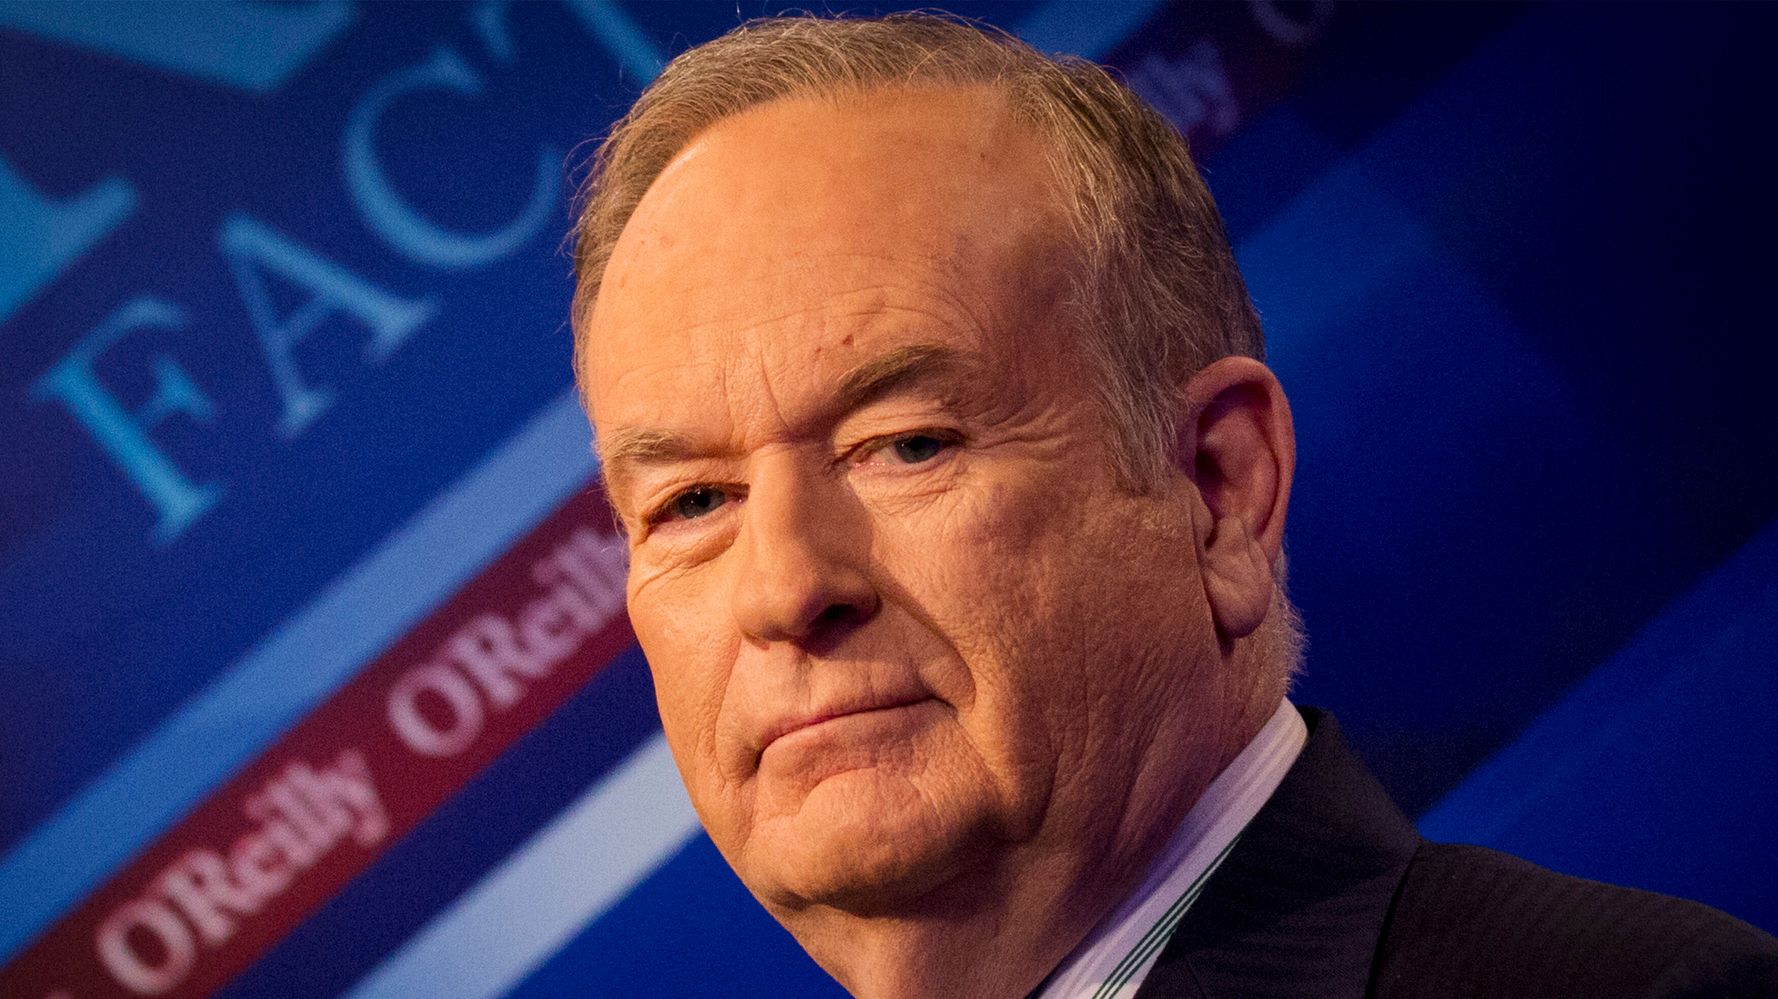 Bill O’Reilly’s Hot Take On Andrew Cuomo’s Resignation Goes Awry